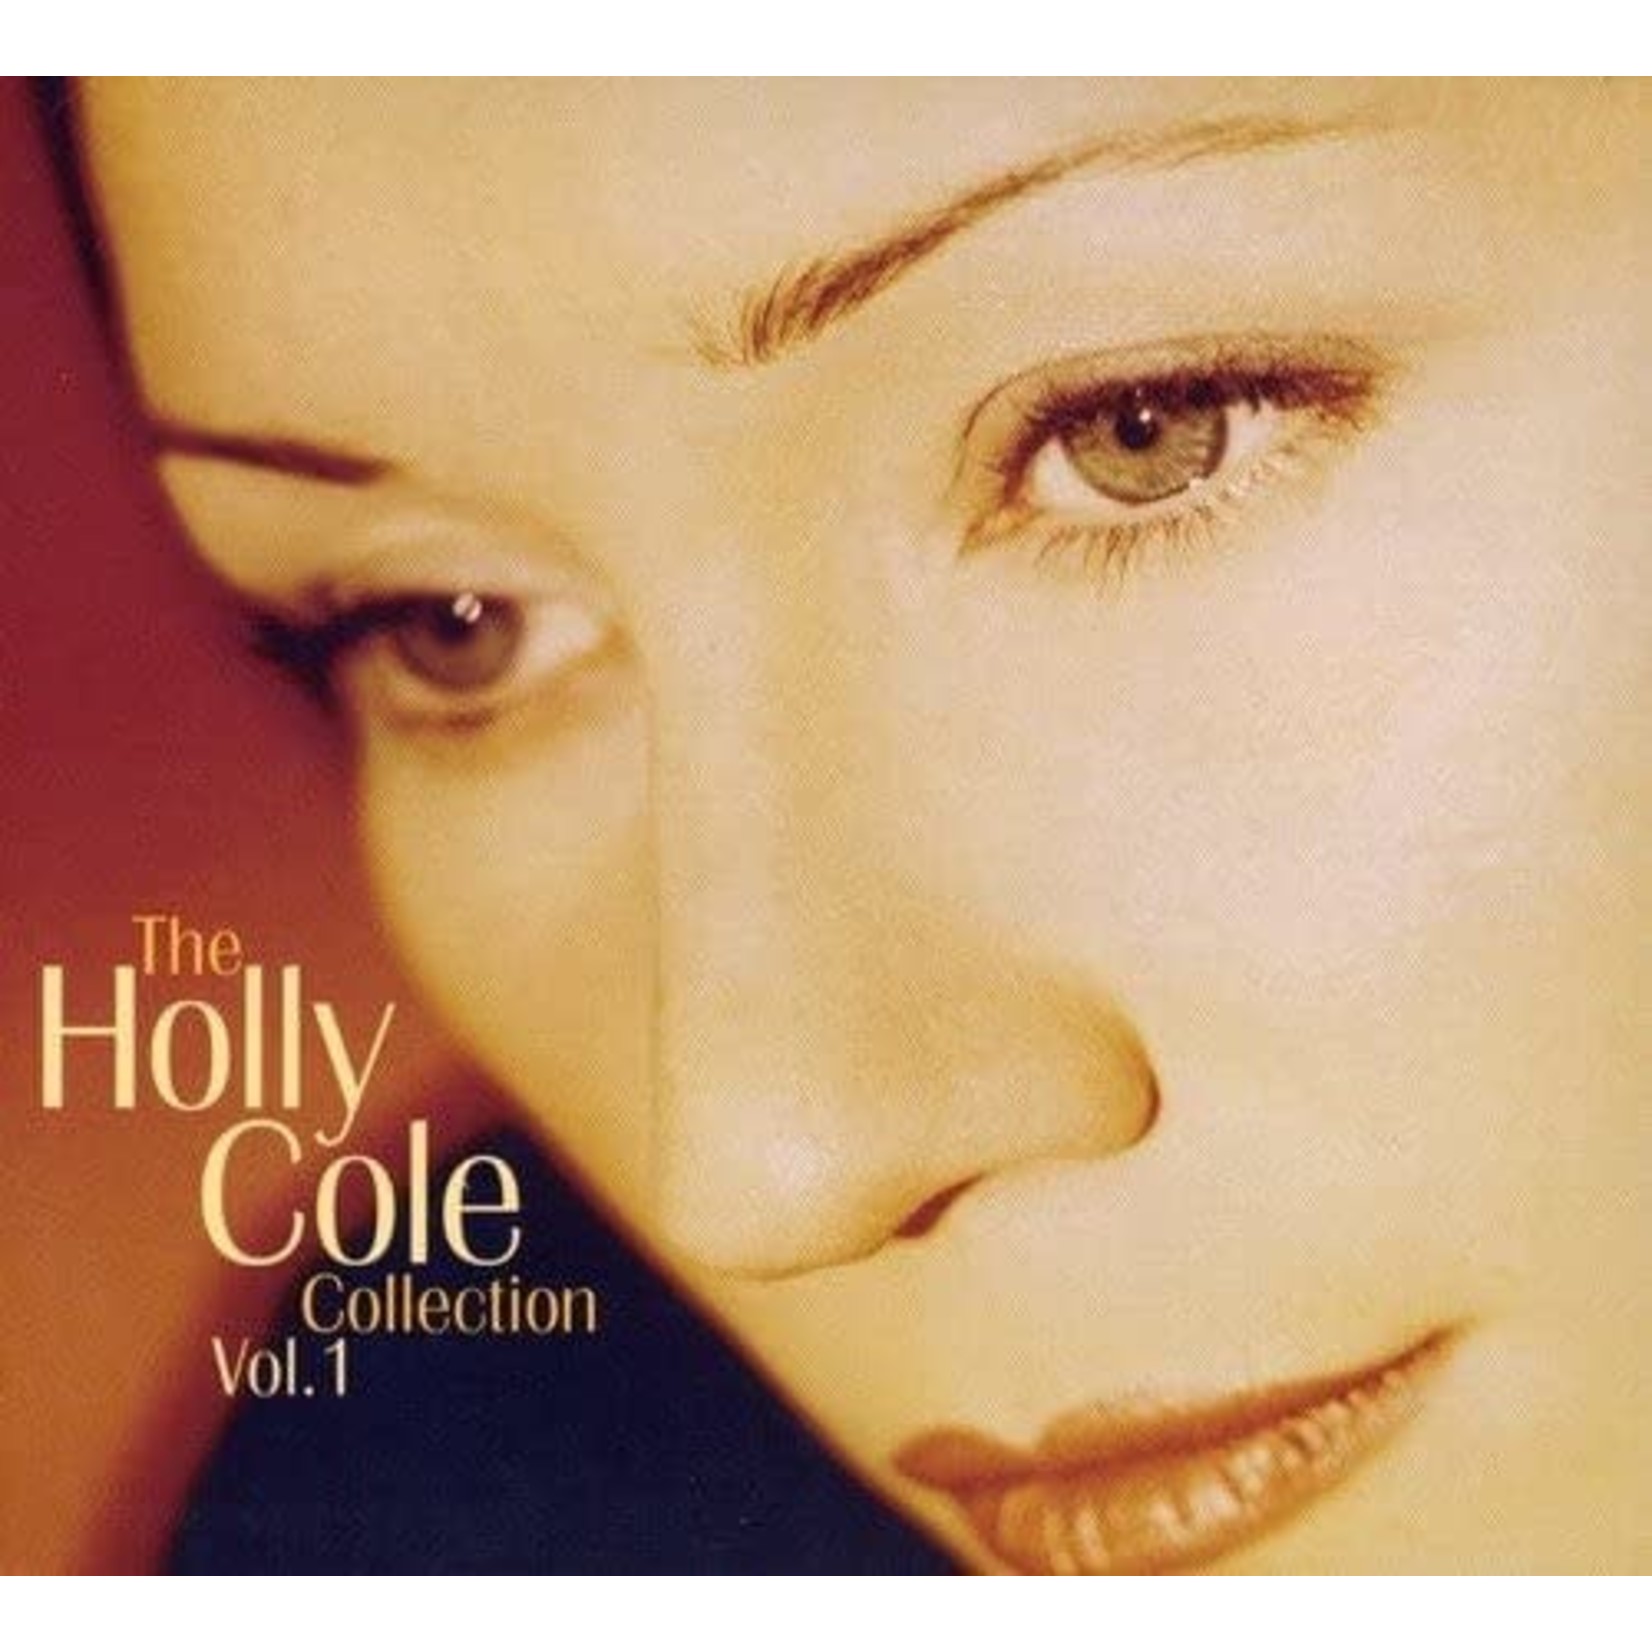 Holly Cole - The Holly Cole Collection Vol. 1 [USED CD]